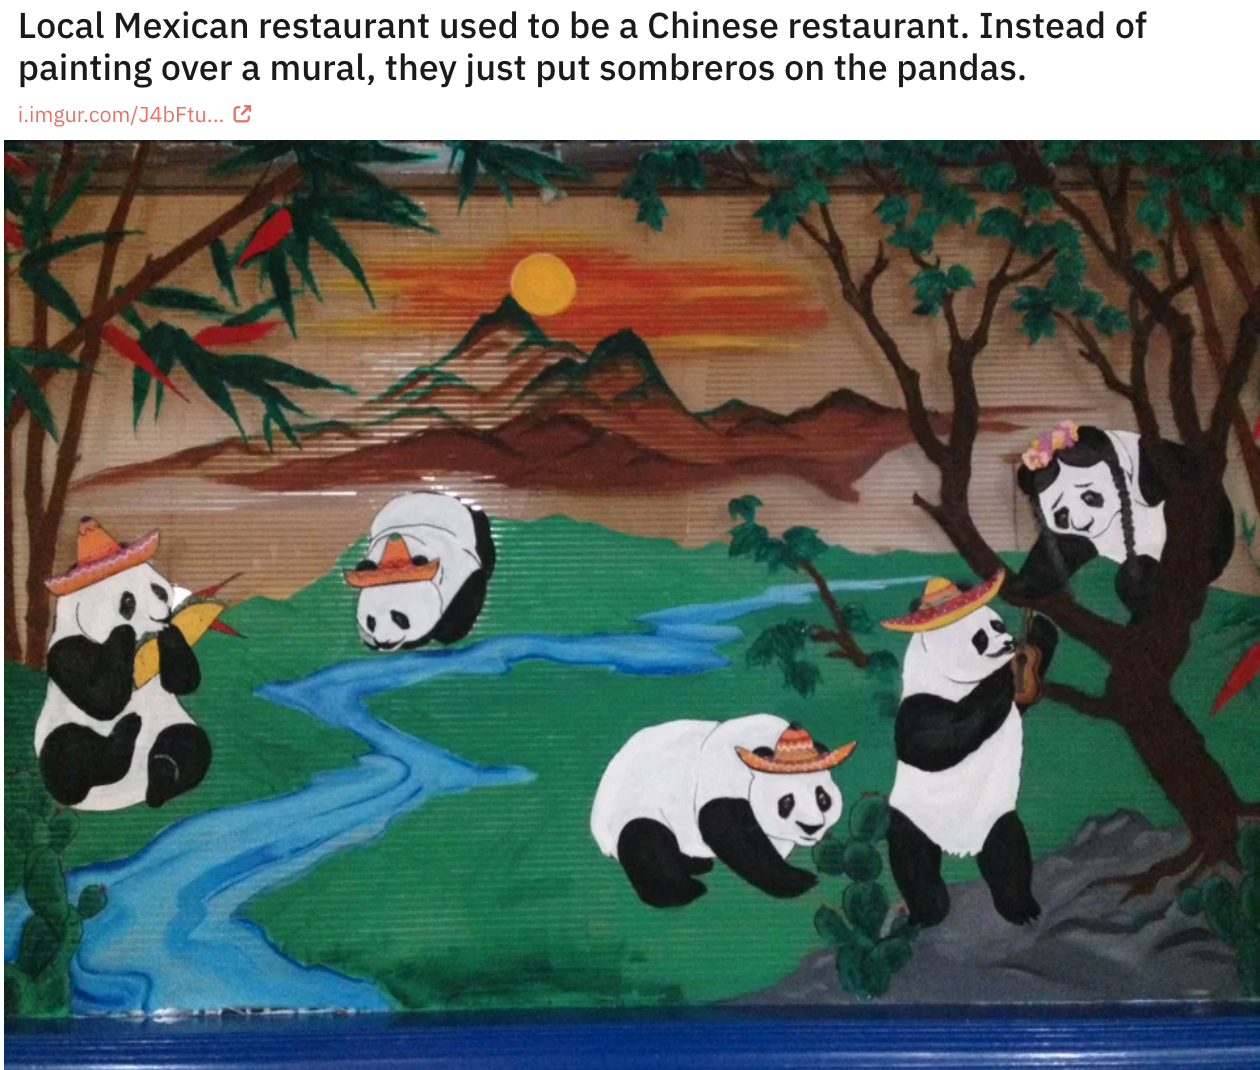 cool and funny pics - Local Mexican restaurant used to be a Chinese restaurant. Instead of painting over a mural, they just put sombreros on the pandas.